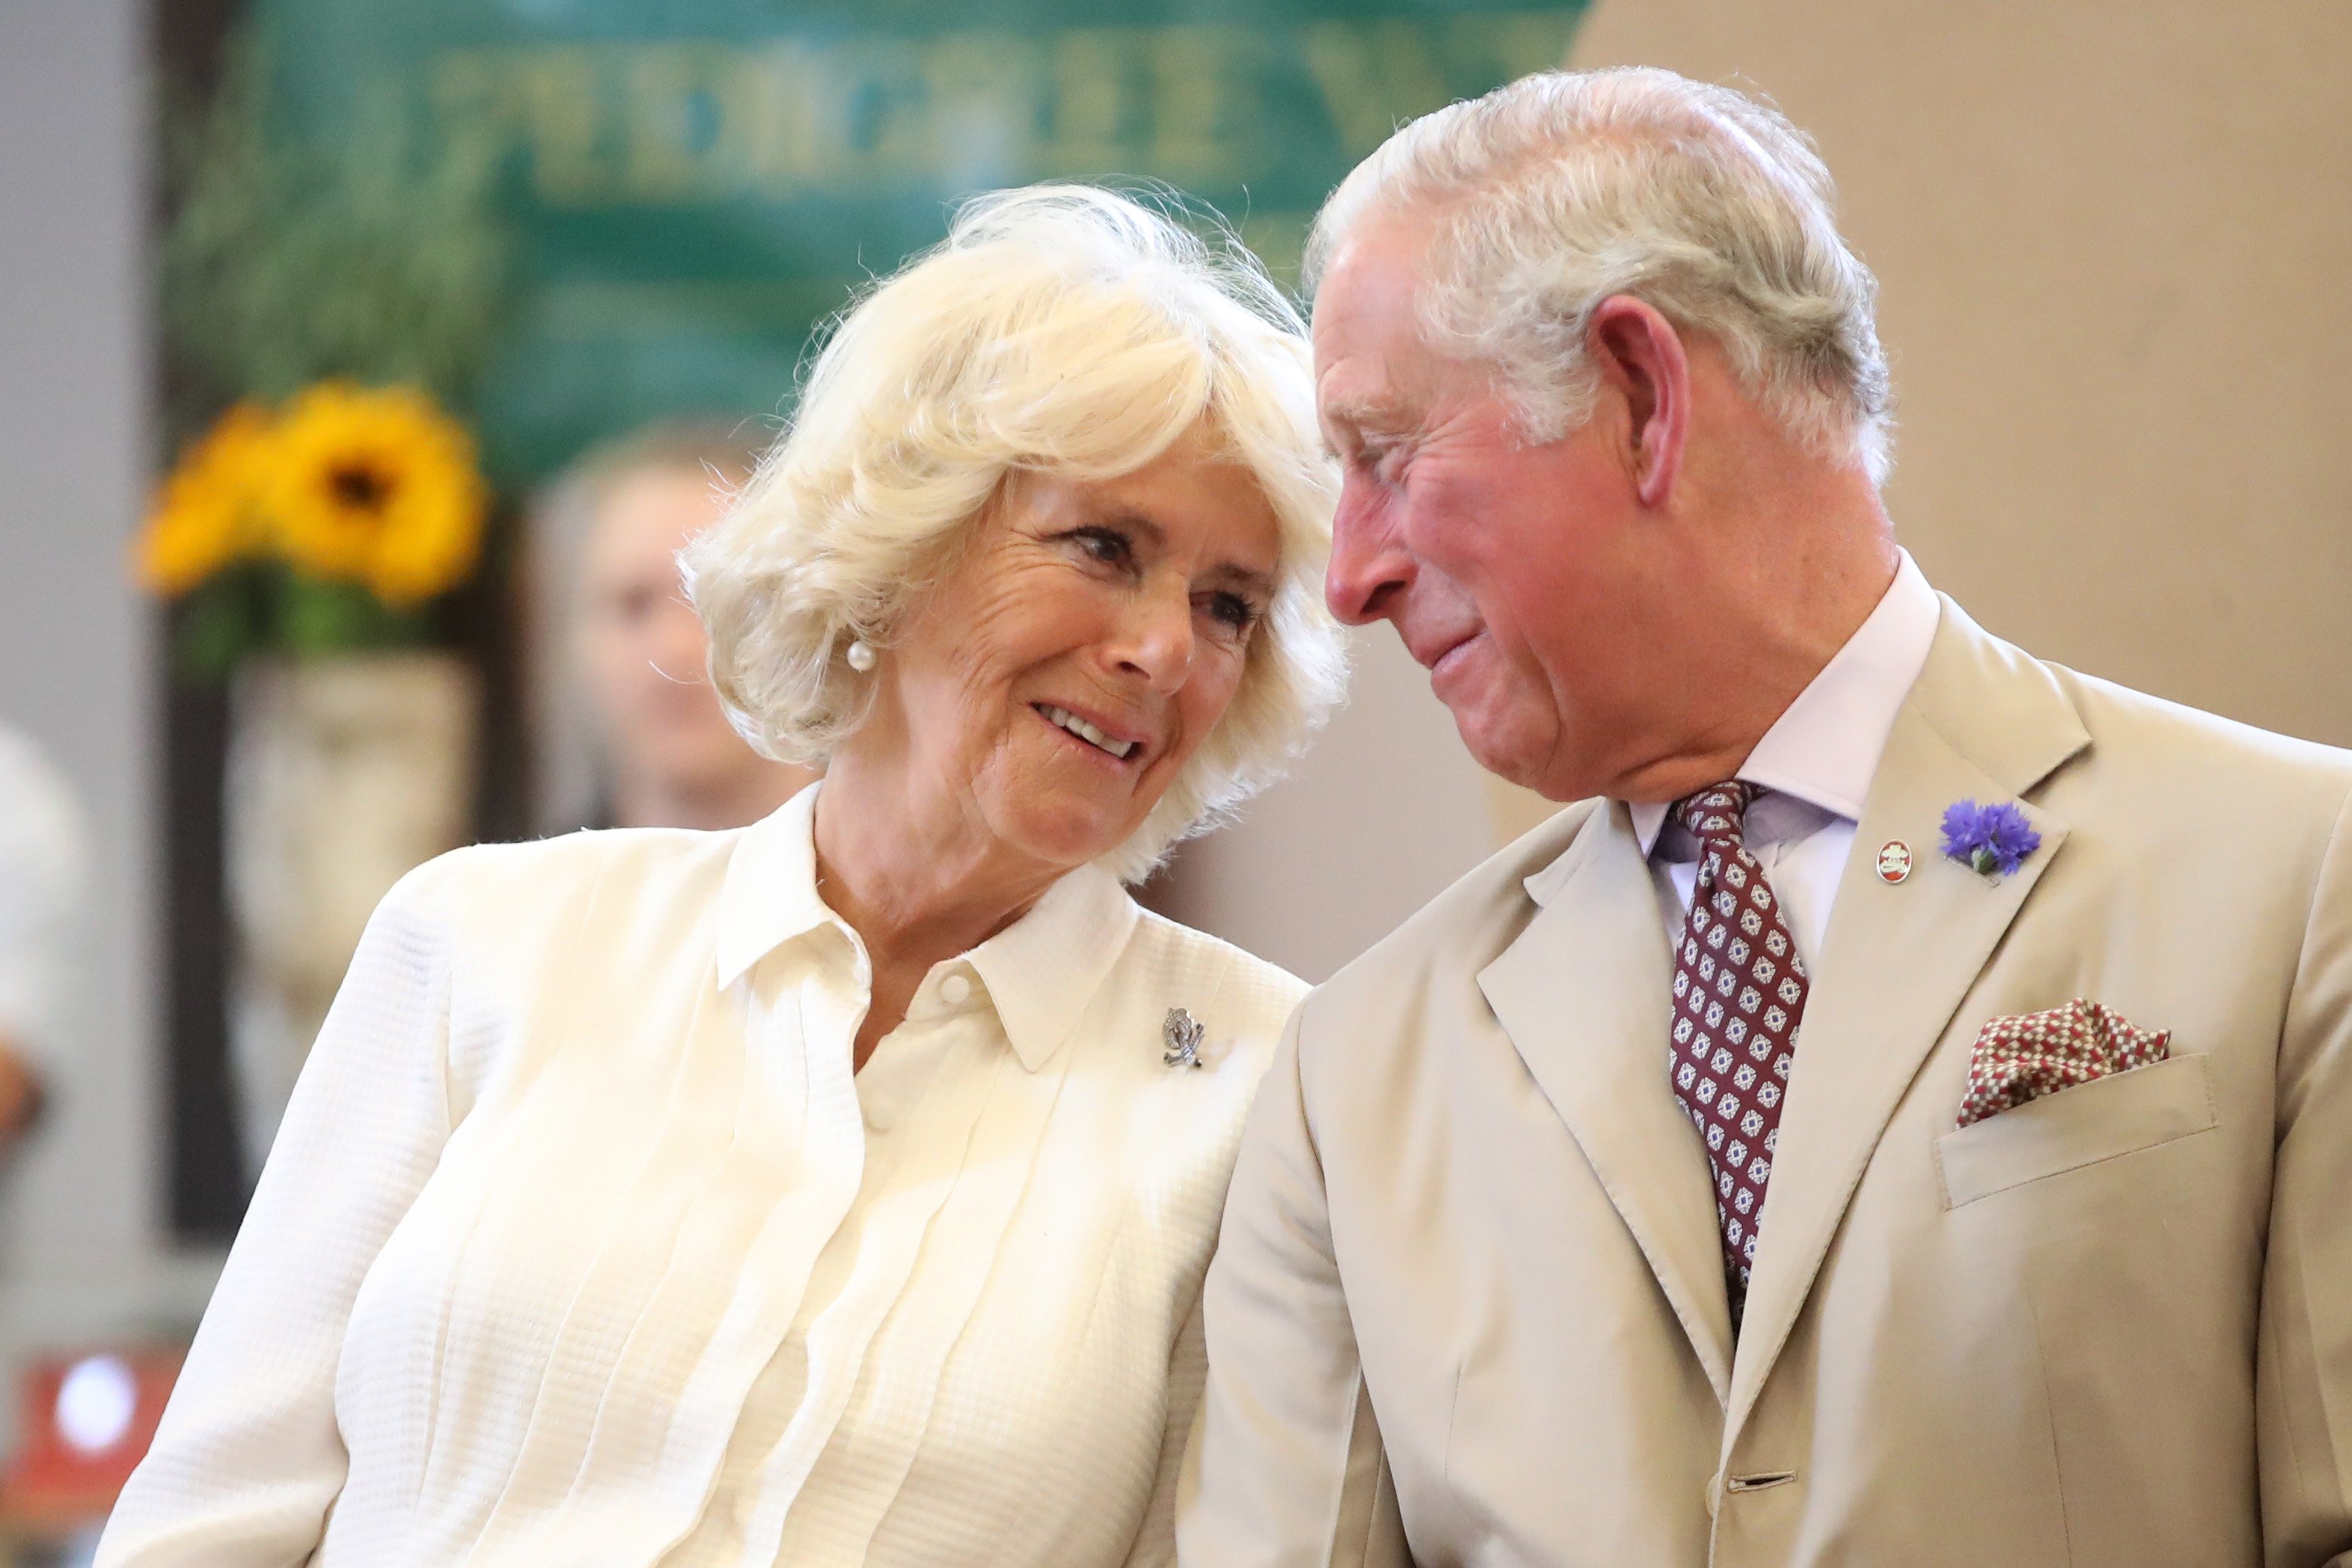 Prince Charles and Camilla, Duchess of Cornwall attending the reopening the newly-renovated Edwardian community hall The Strand Hall during day three of a visit to Wales on July 4, 2018 in Builth Wells, Wales. | Source: Getty Images